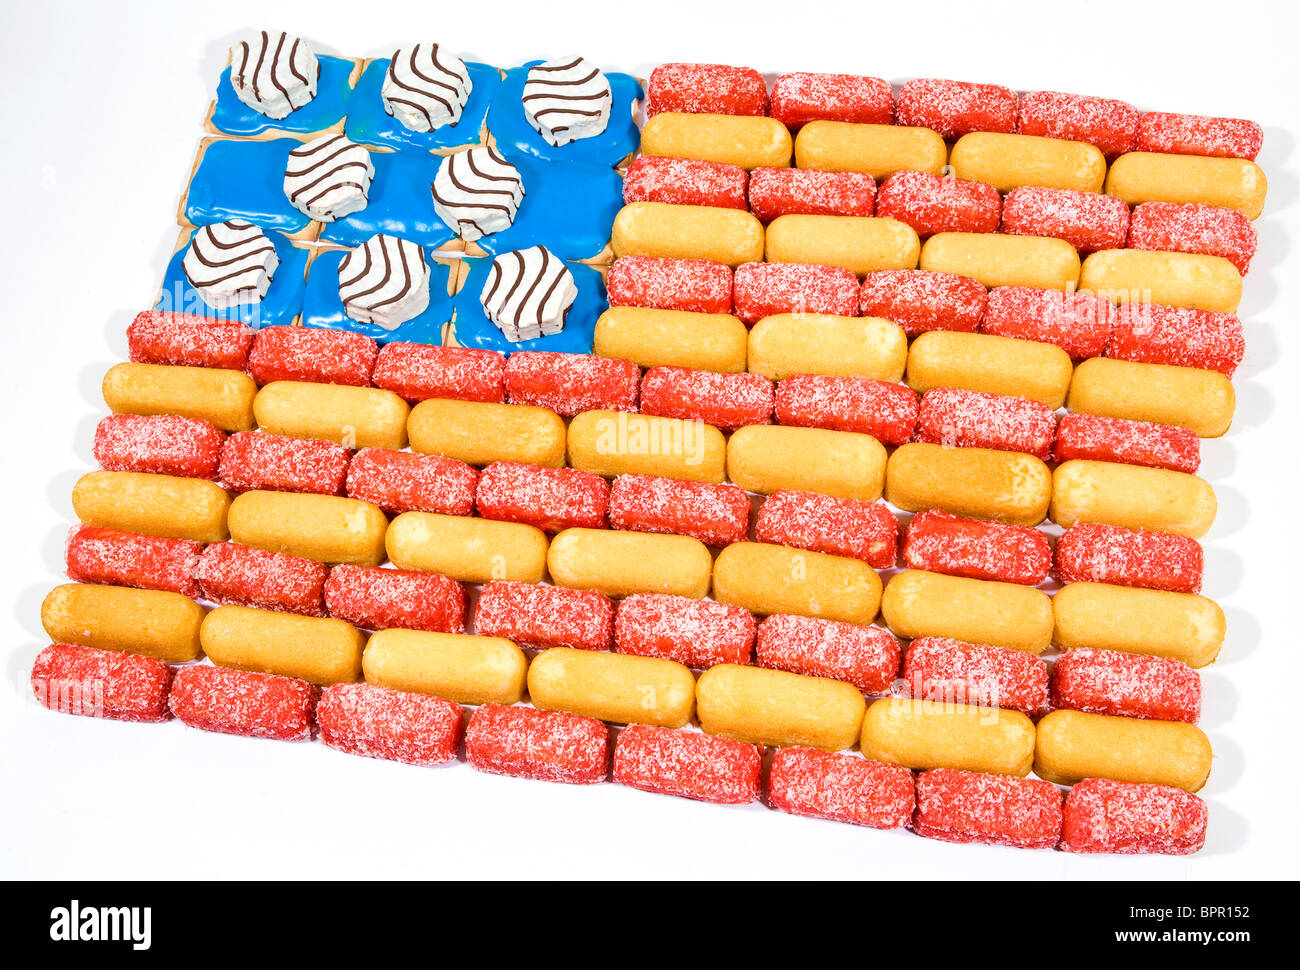 A American Flag made of junk food items including Twinkies, Zingers and Pop Tarts.  Stock Photo